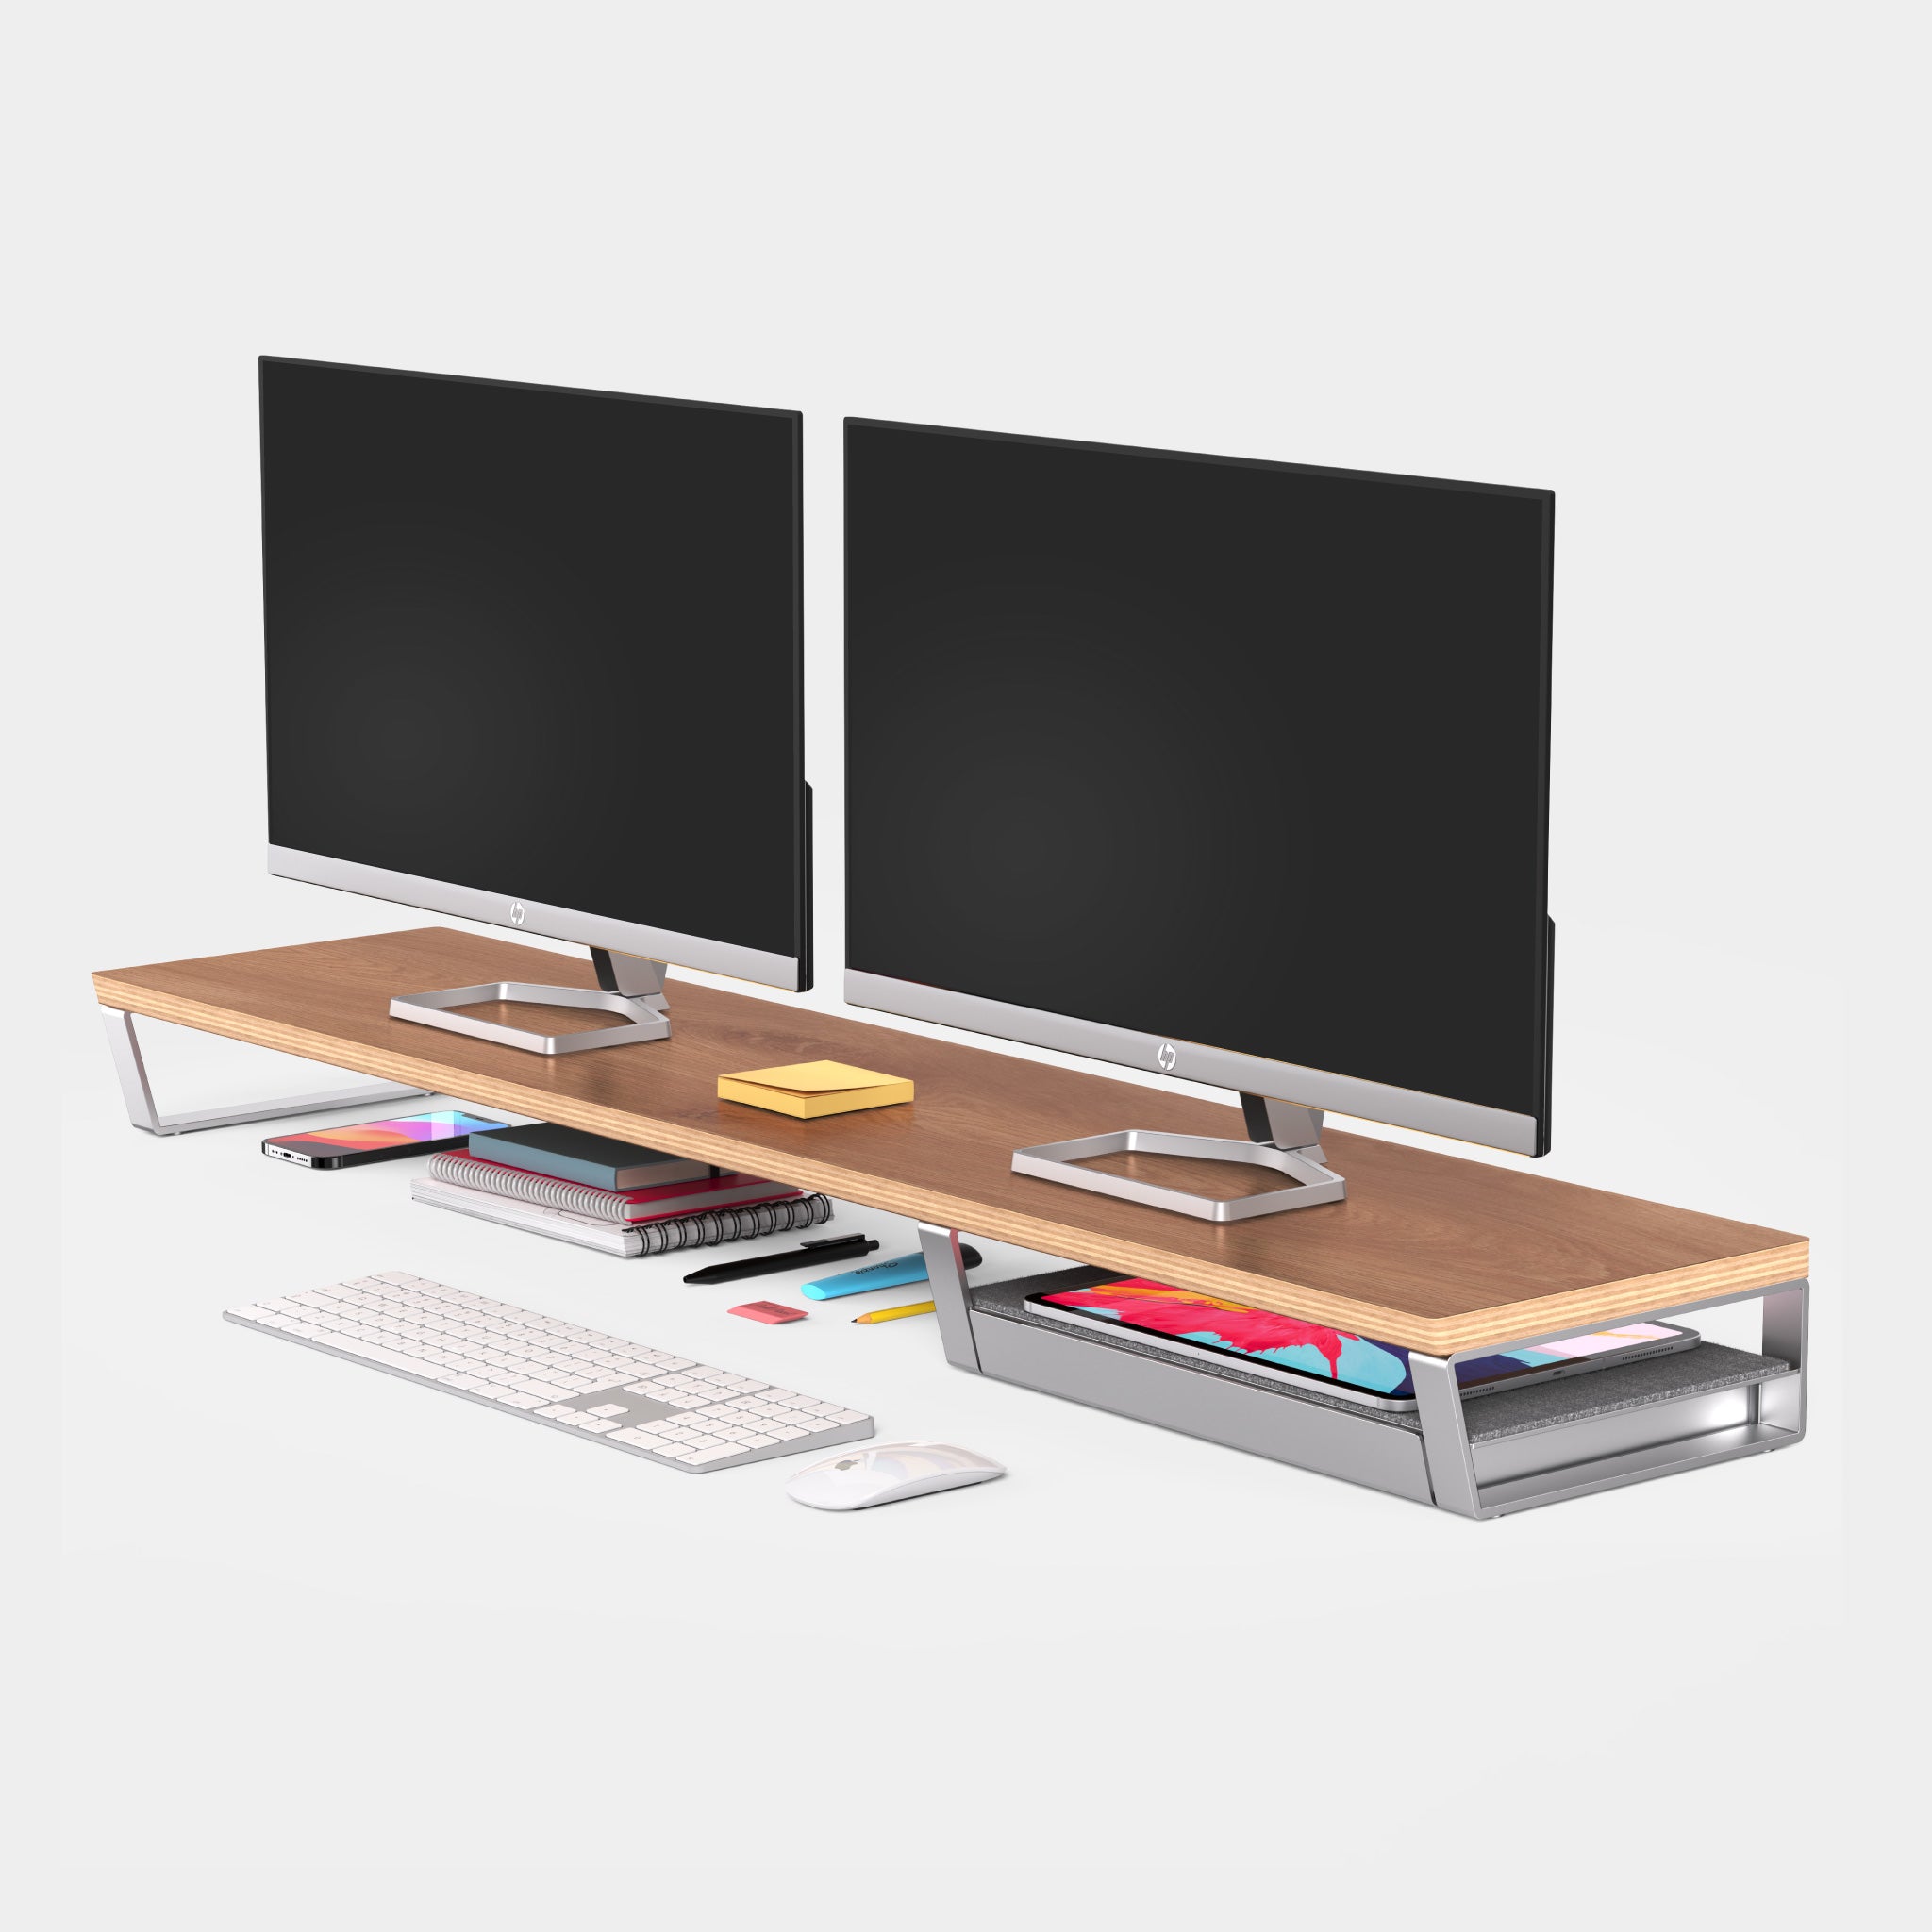 Walnut Desk Shelf & Monitor Stand Desk and Home Organisation Home Office  Storage and Wood Desk Accessories 